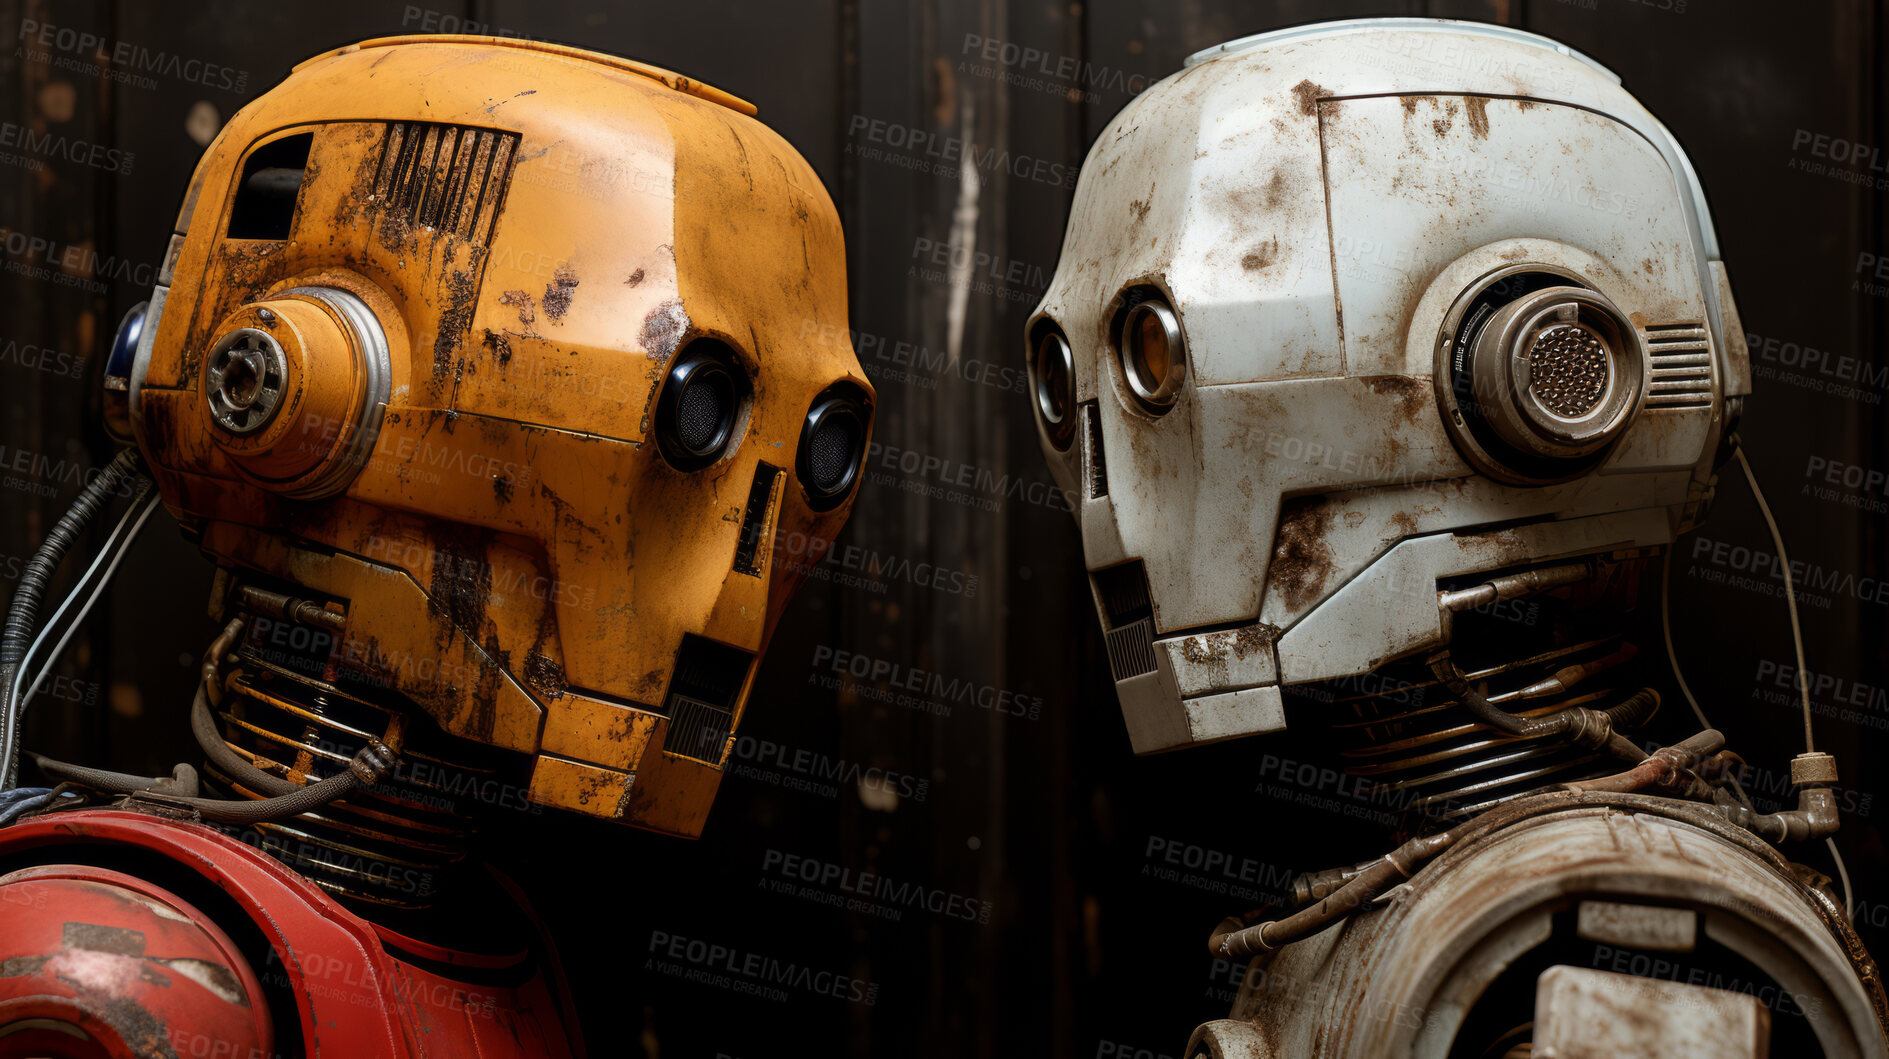 Buy stock photo Portrait of vintage robots looking  at each other. Against dark background.